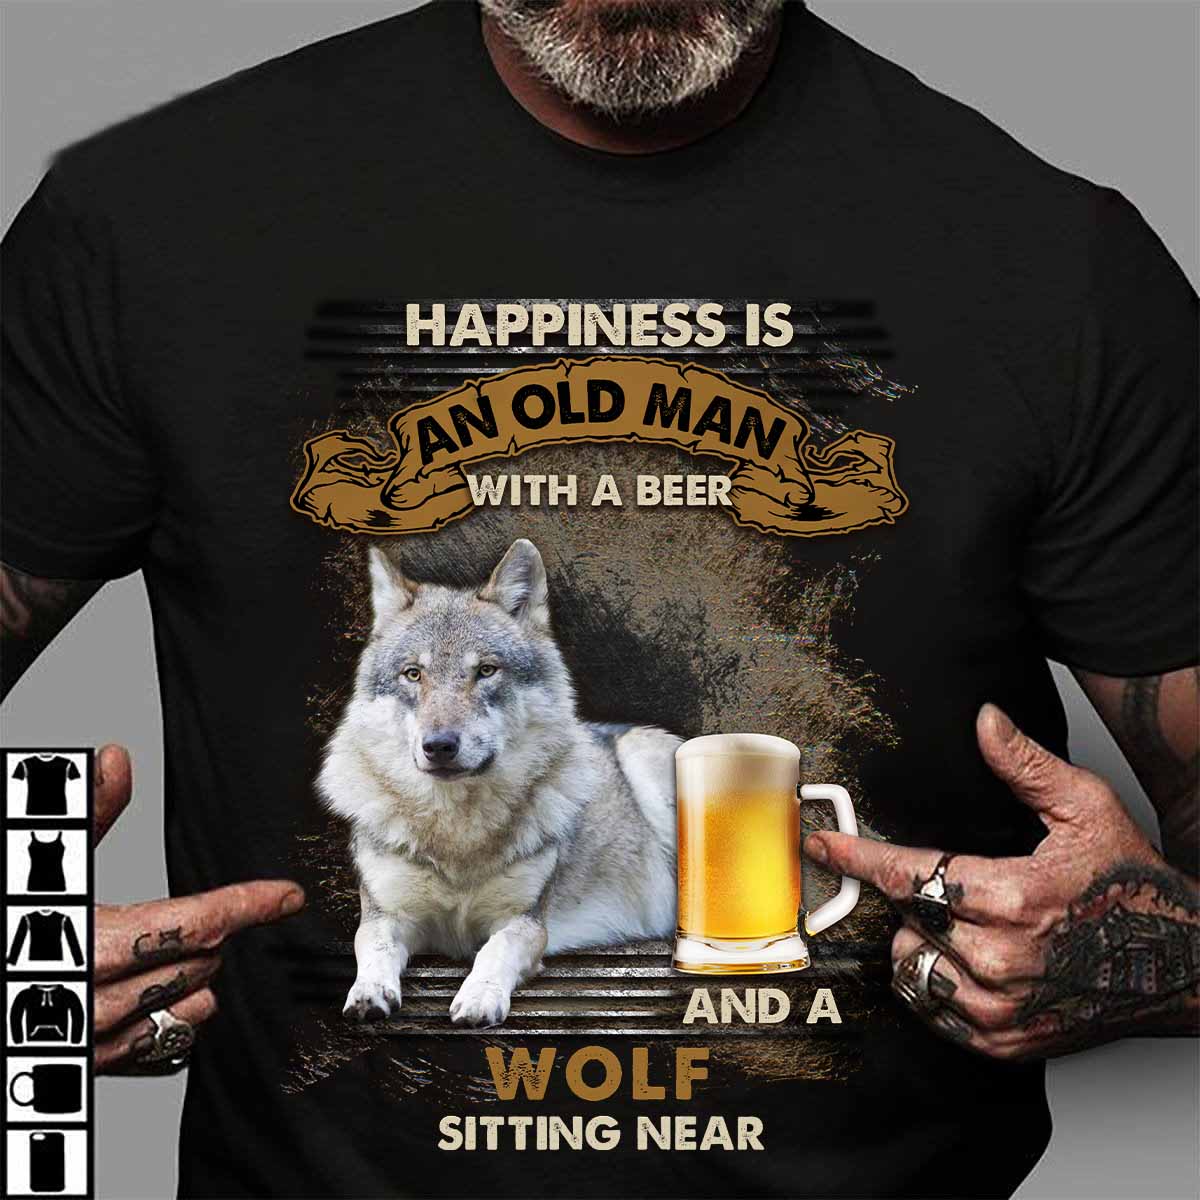 Happiness is an old man with a beer and a wolf sitting near - Beer lover